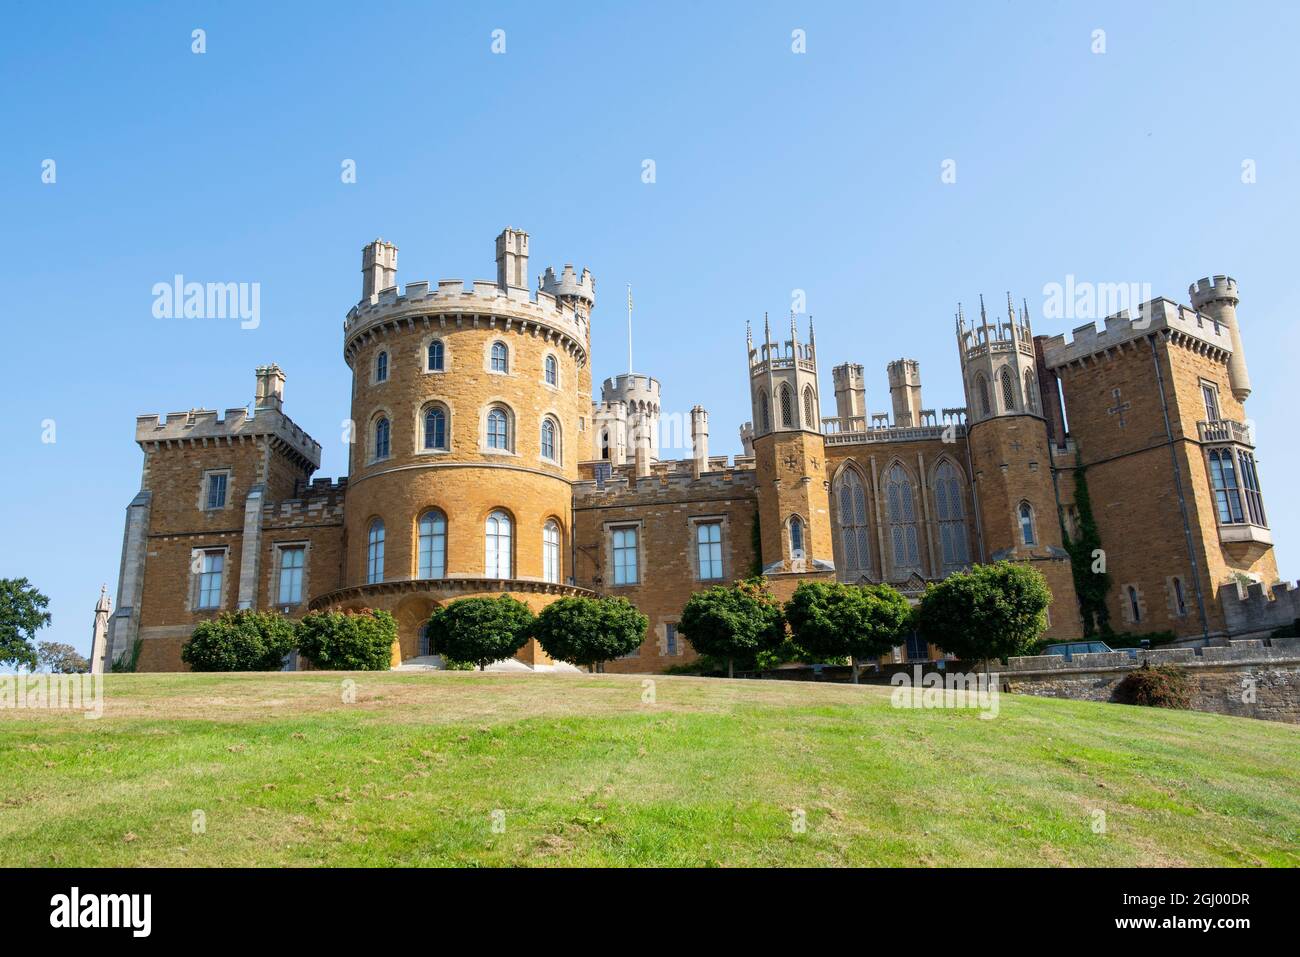 A sunny summer day at Belvoir Castle, Leicestershire England UK Stock Photo